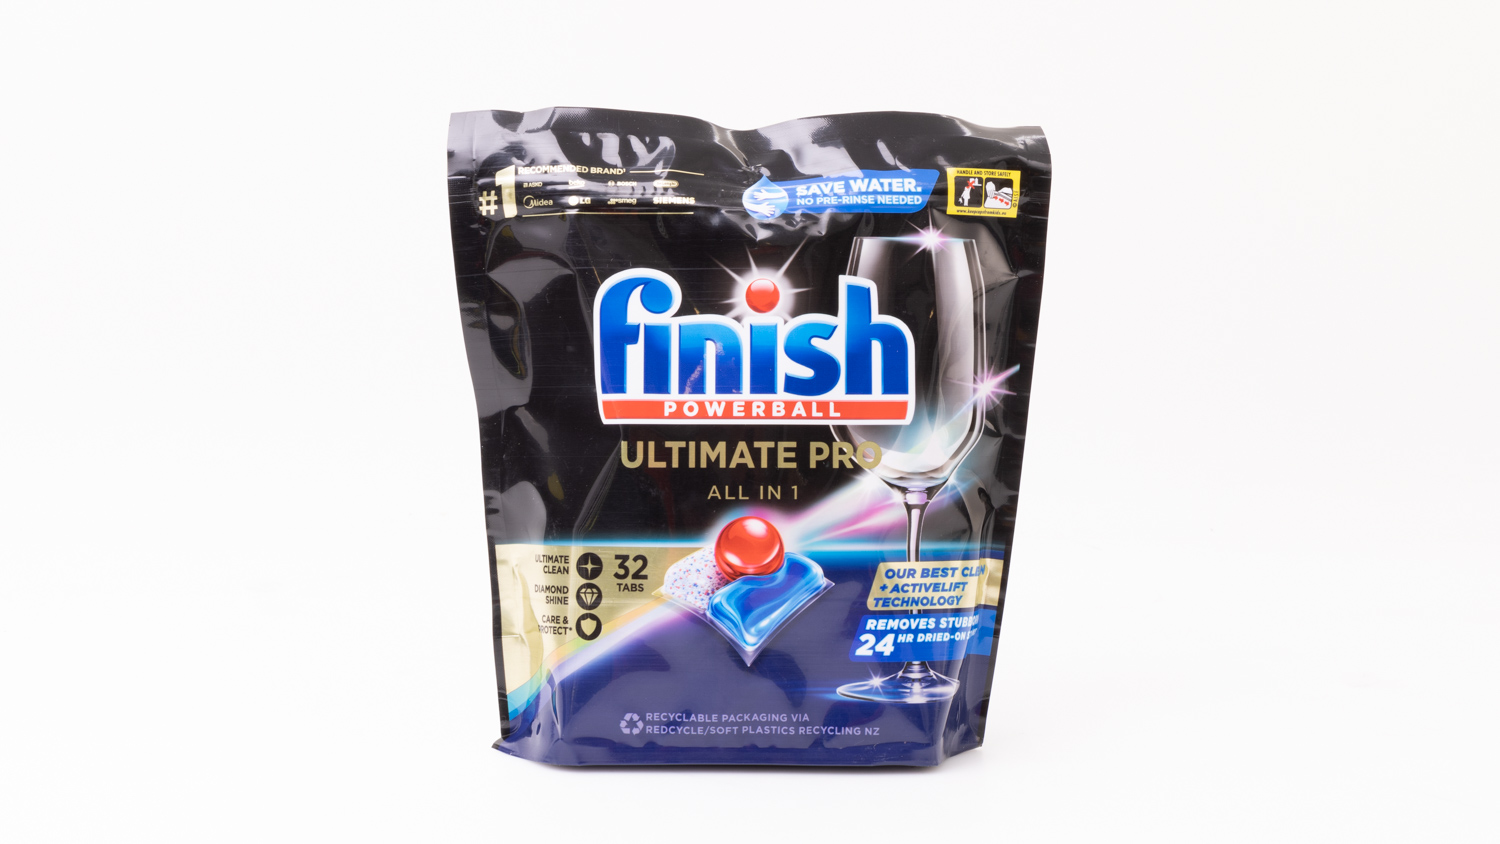 Finish Powerball Ultimate Pro All in 1 Tabs Review